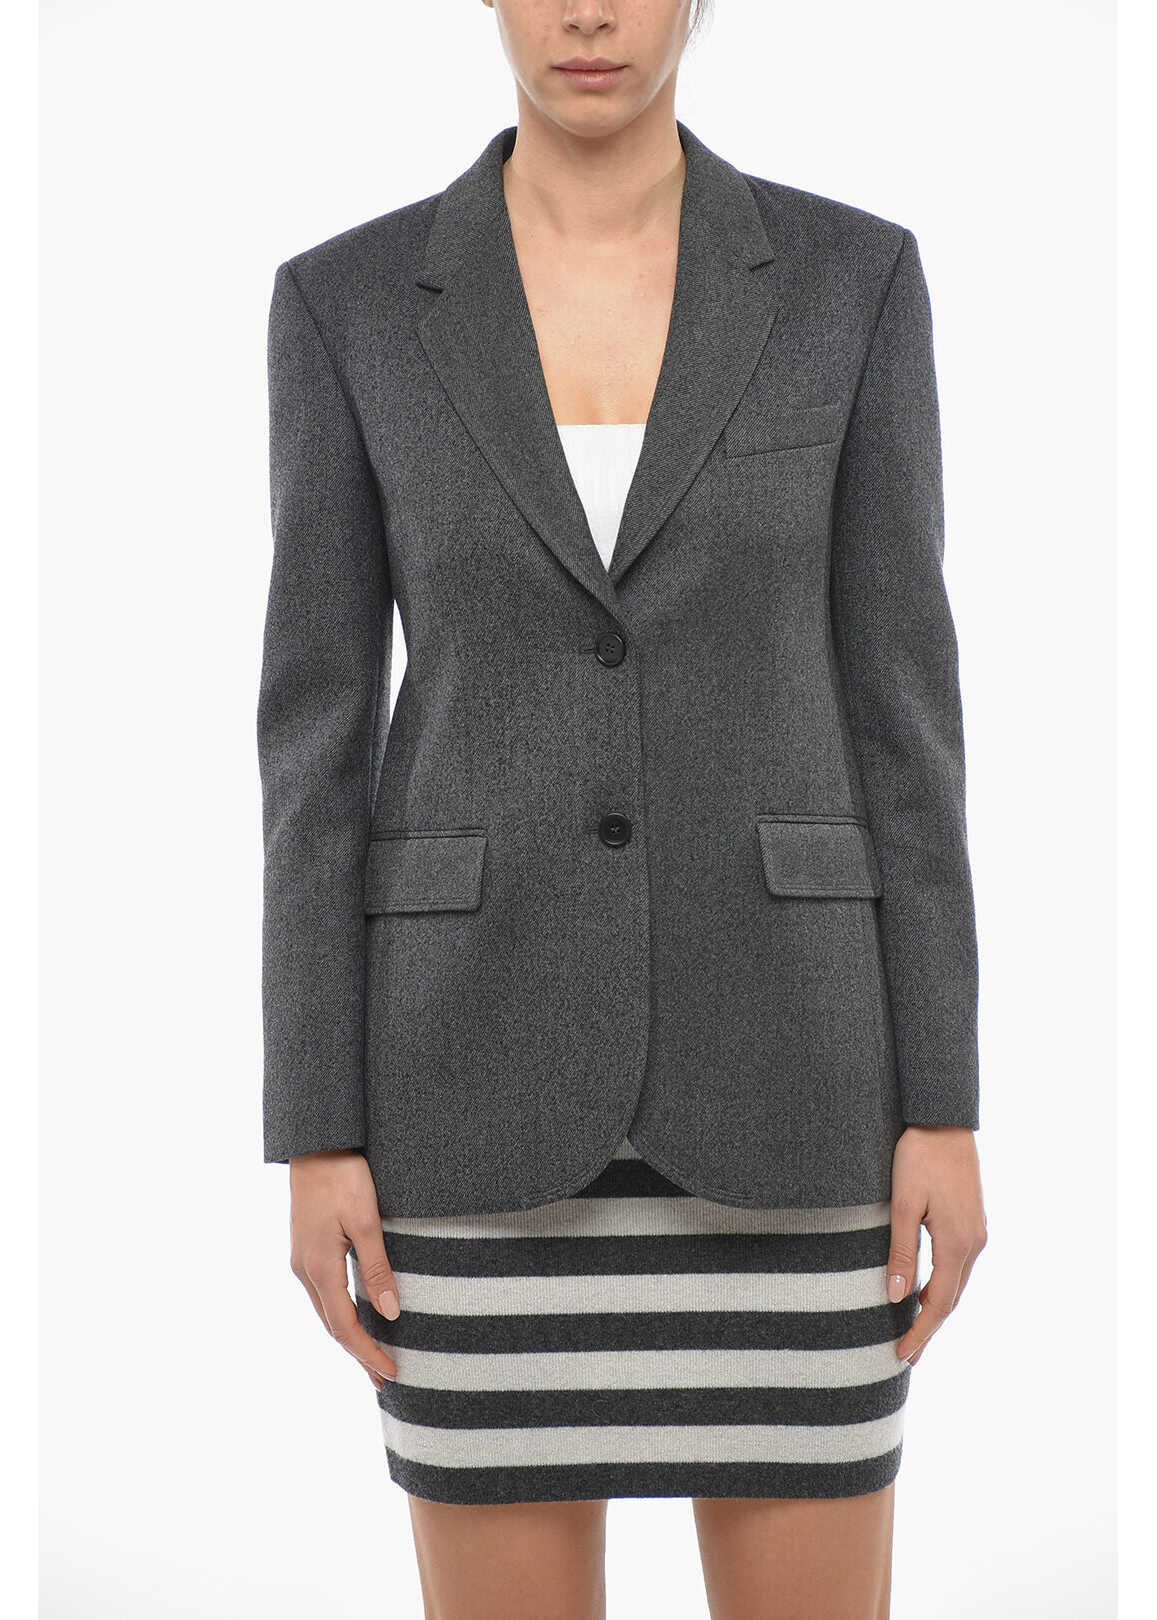 Chloe Wool Lined Simgle Breasted Blazer With Flap Pockets Gray